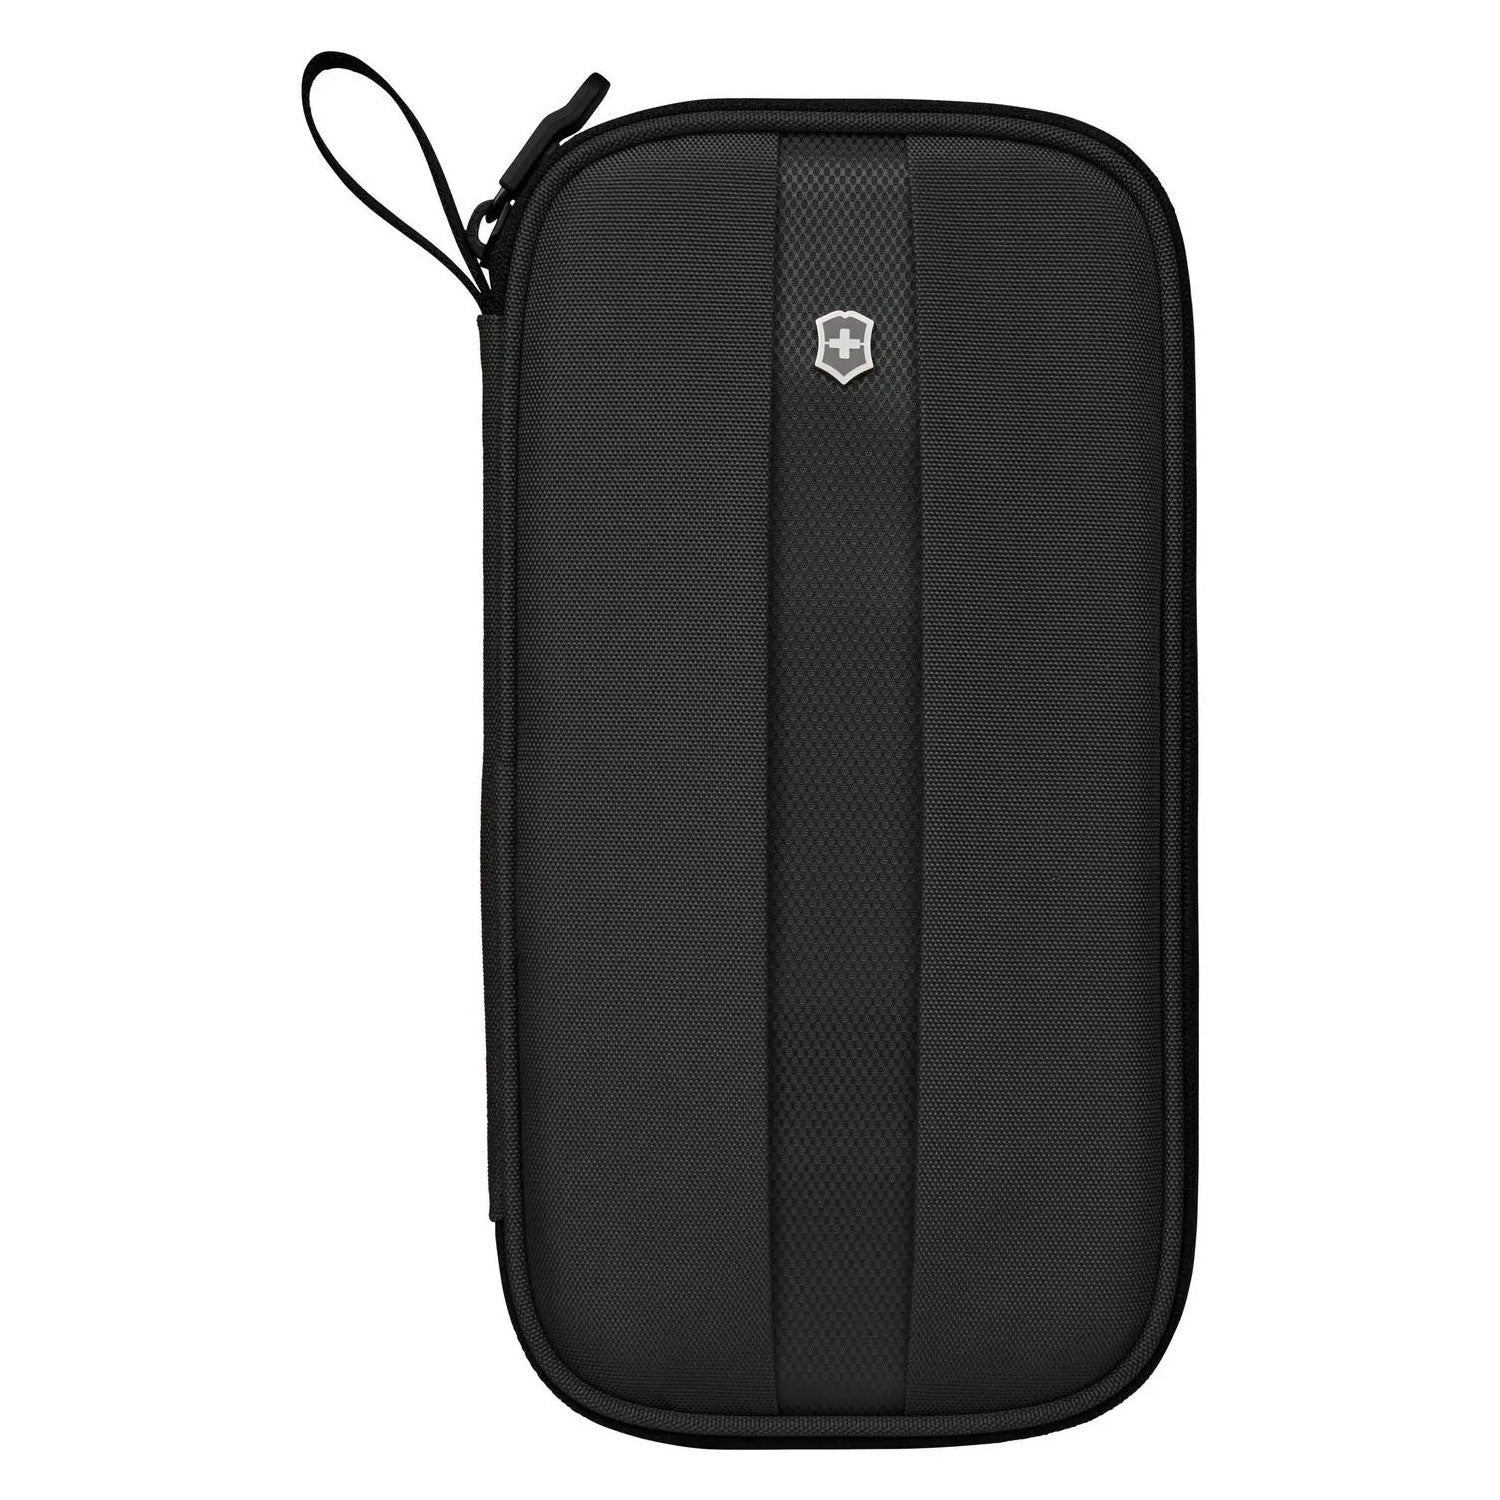 Victorinox Swiss Army Travel Accessories 5.0 Travel Organizer With RFID Protection